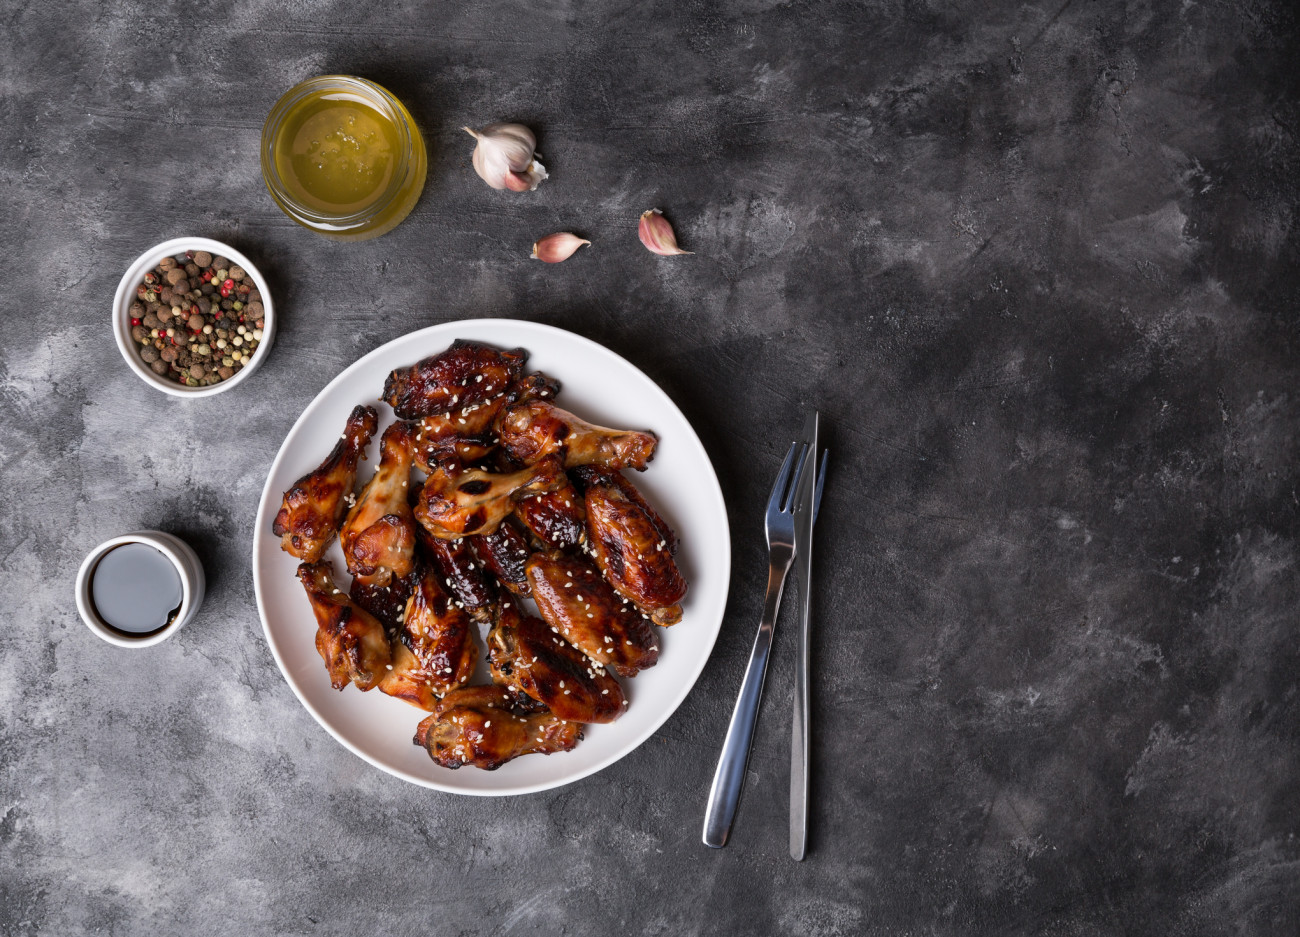 Spicy chicken wings with teriyaki sauce and sesame seeds in a white plate on a dark background.Top view with place for text.